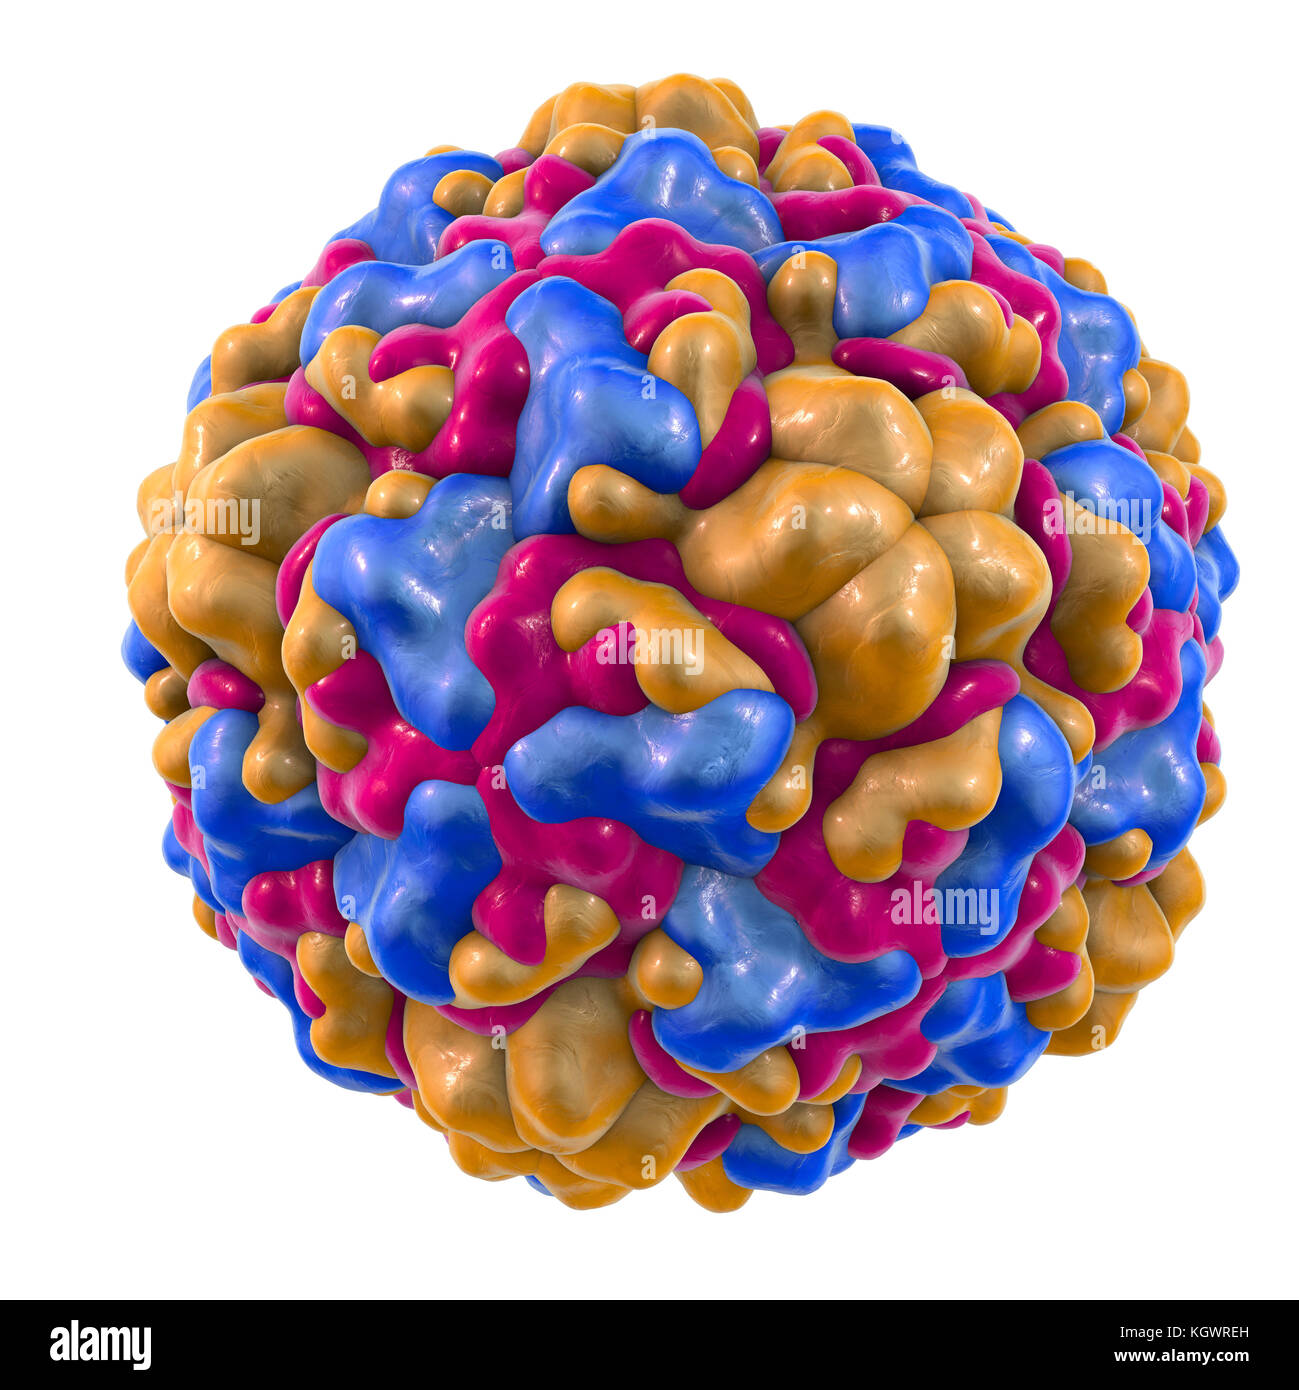 Rhinovirus, computer illustration. The rhinovirus infects the upper respiratory tract and is the cause of the common cold. It is spread by coughs and sneezes. Stock Photo